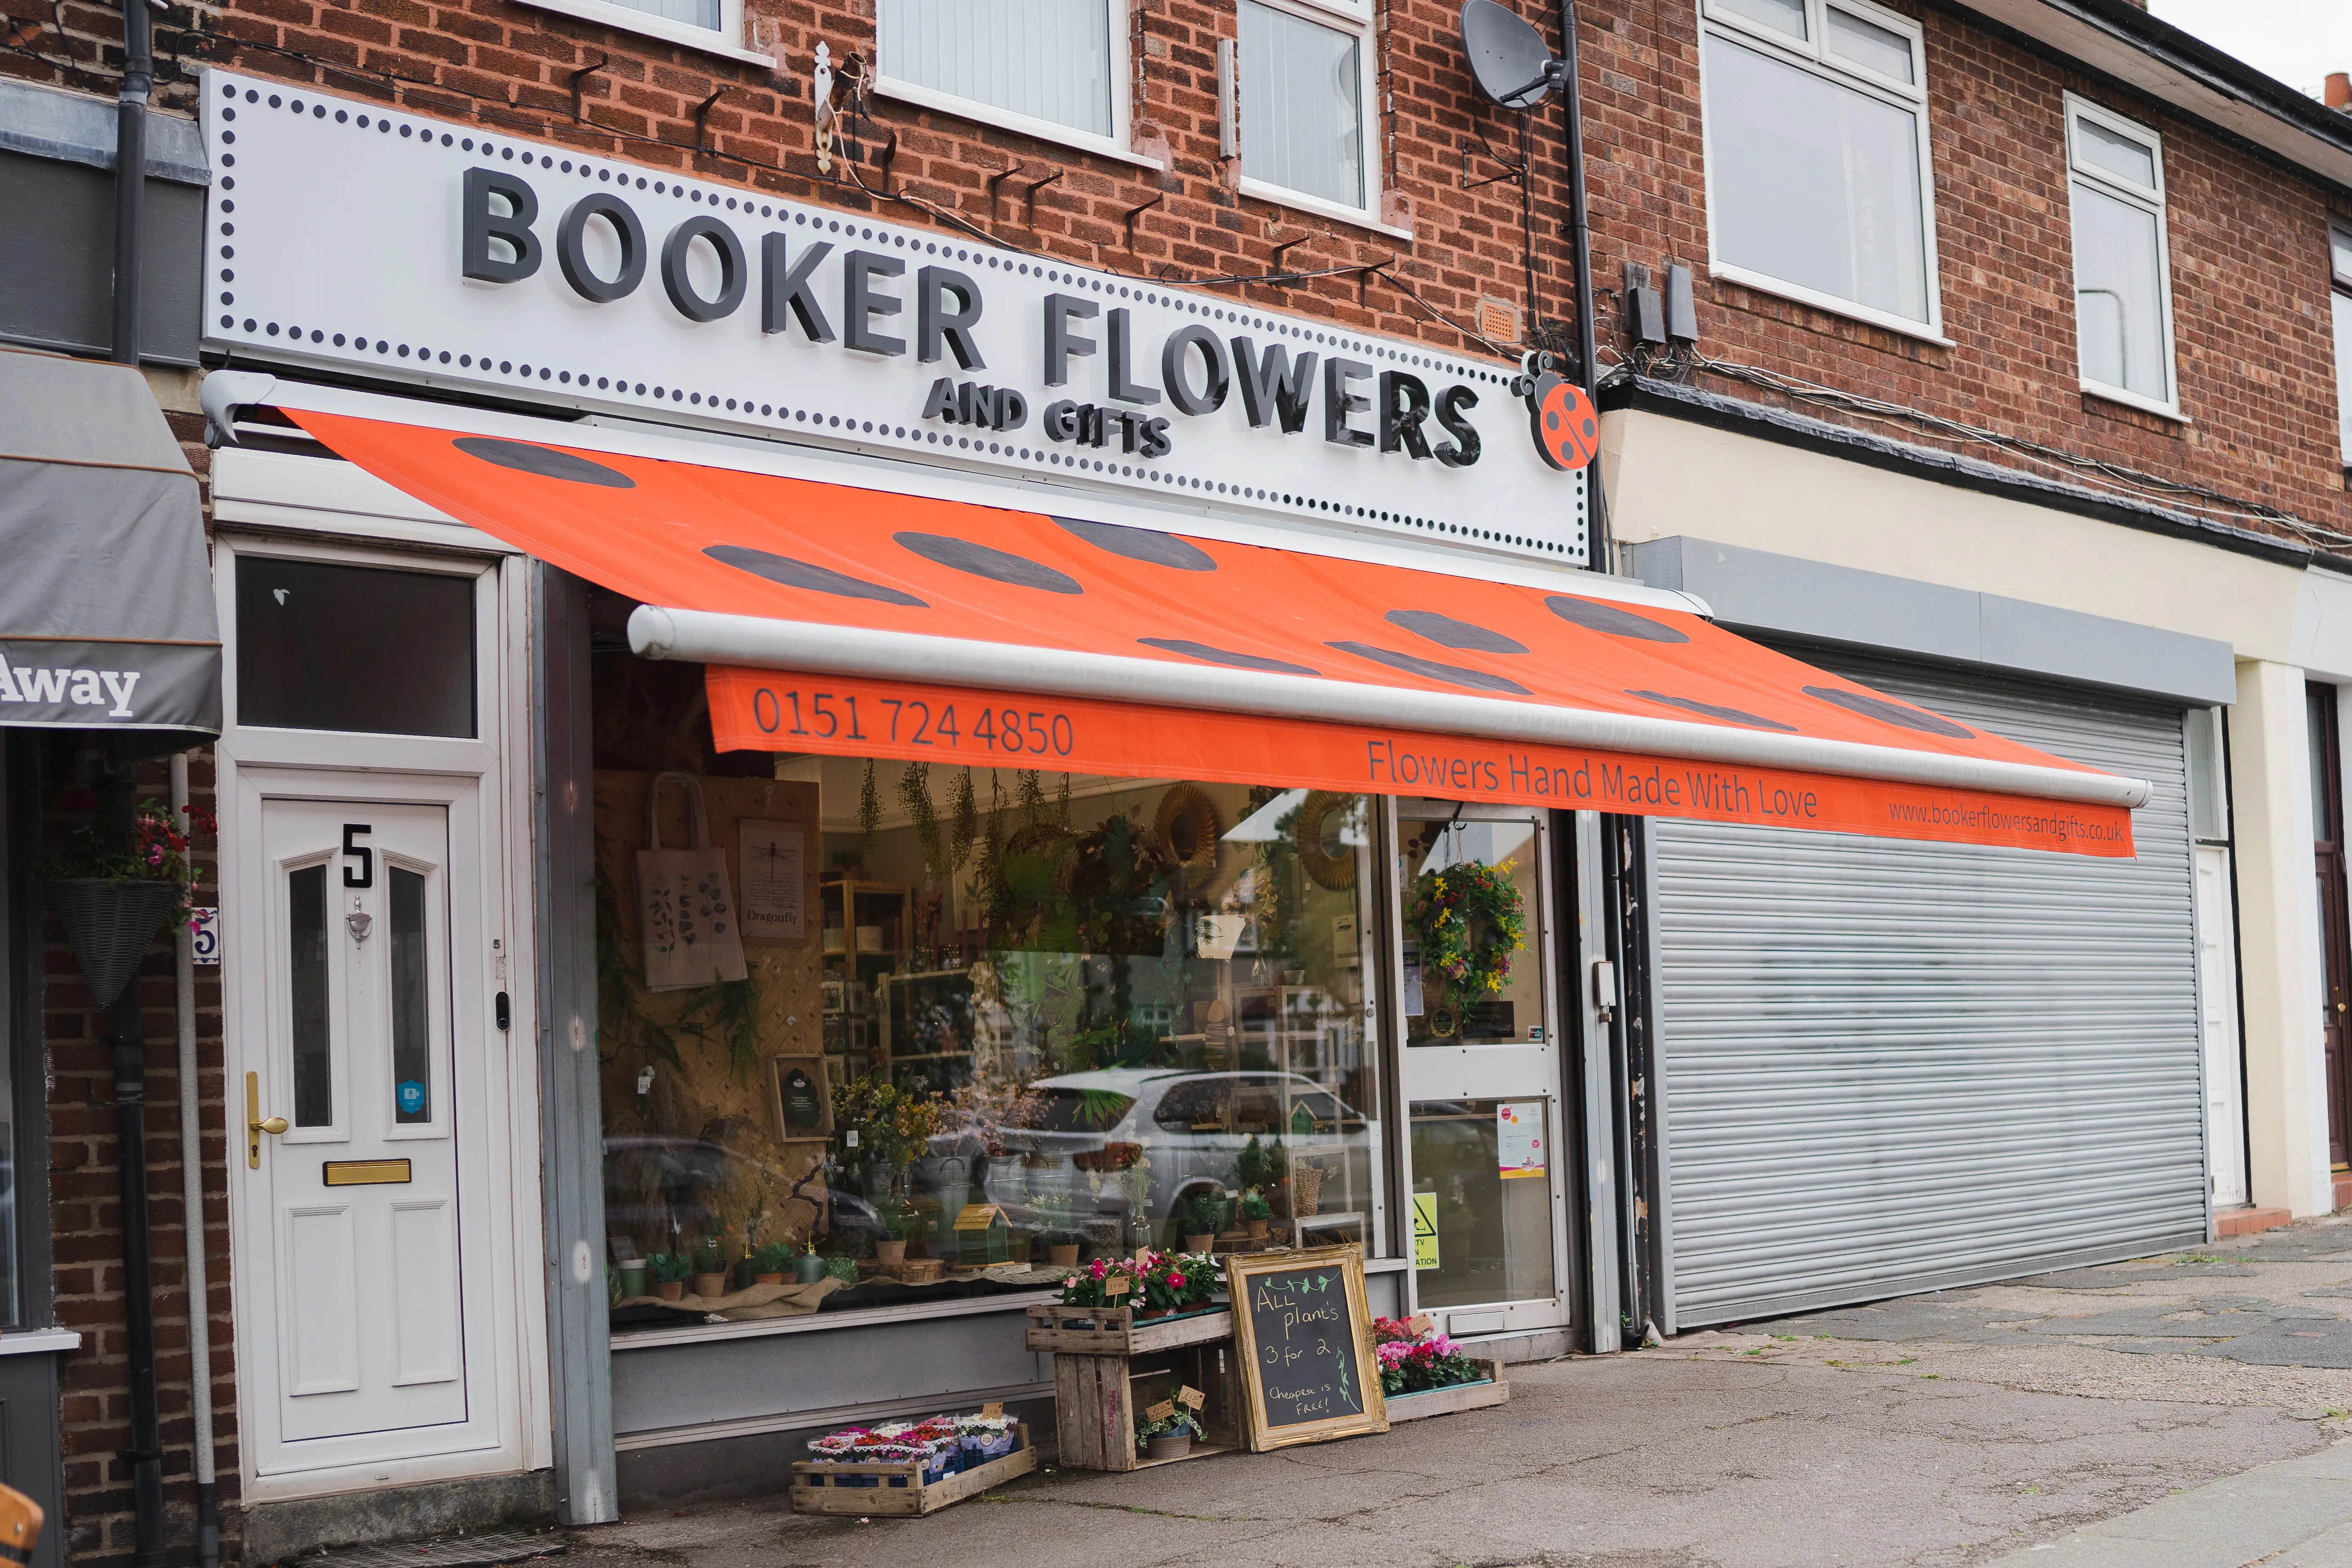 Flower school classes in Liverpool with Booker Flowers and Gifts